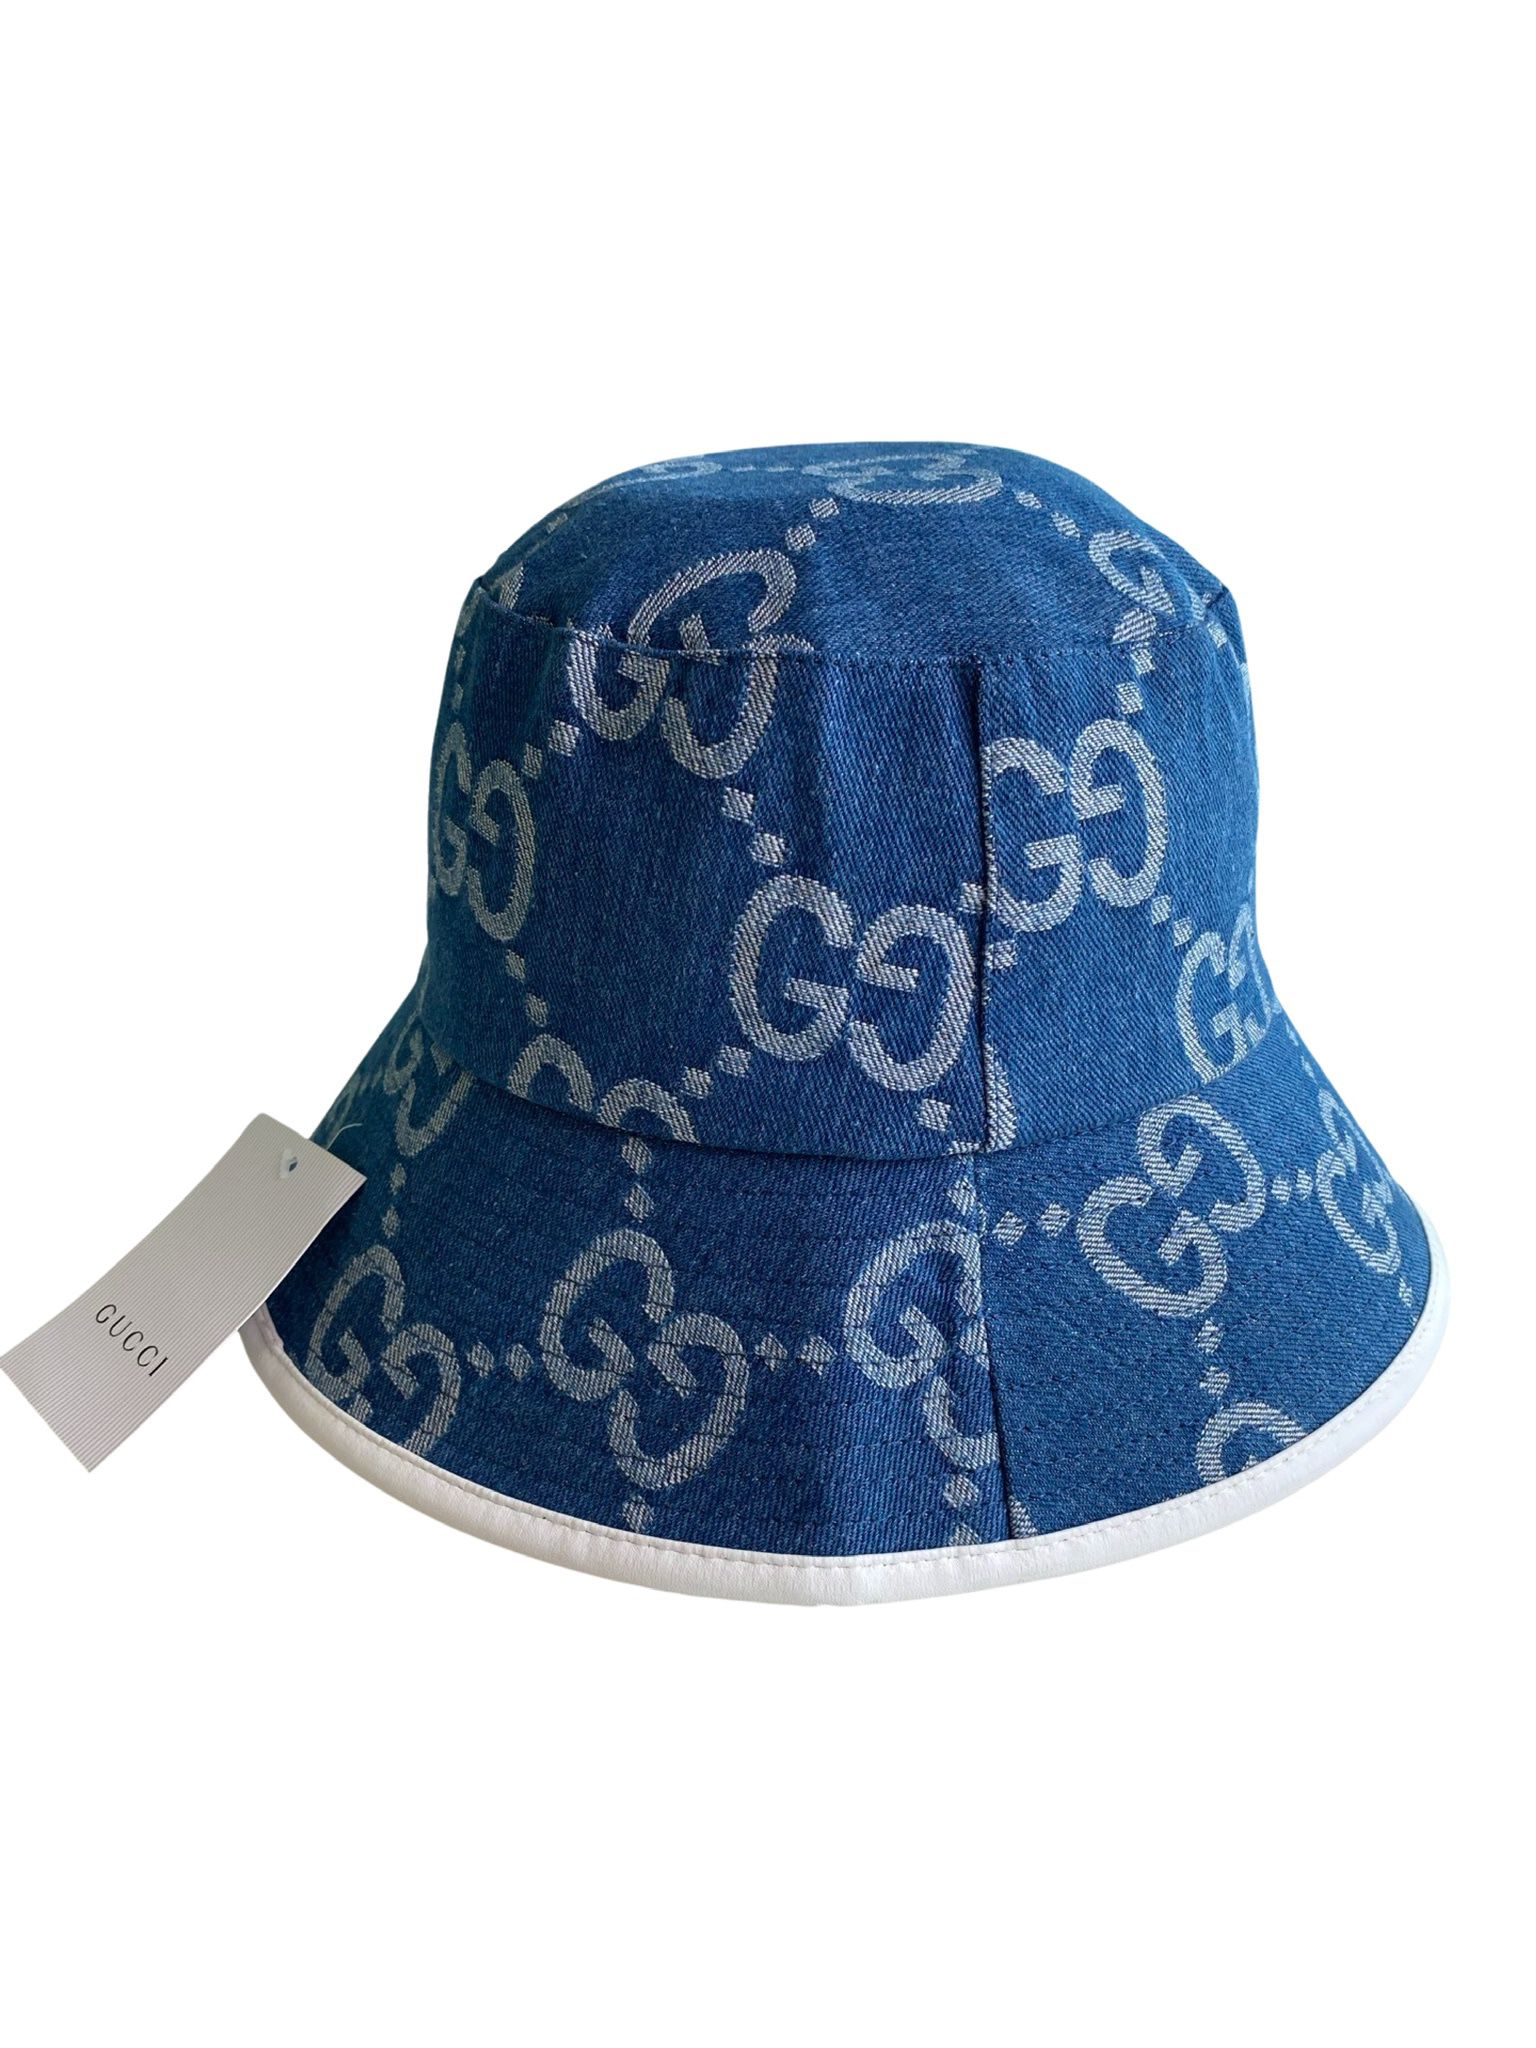 Unisex Bucket Hat Perfect For The Summer